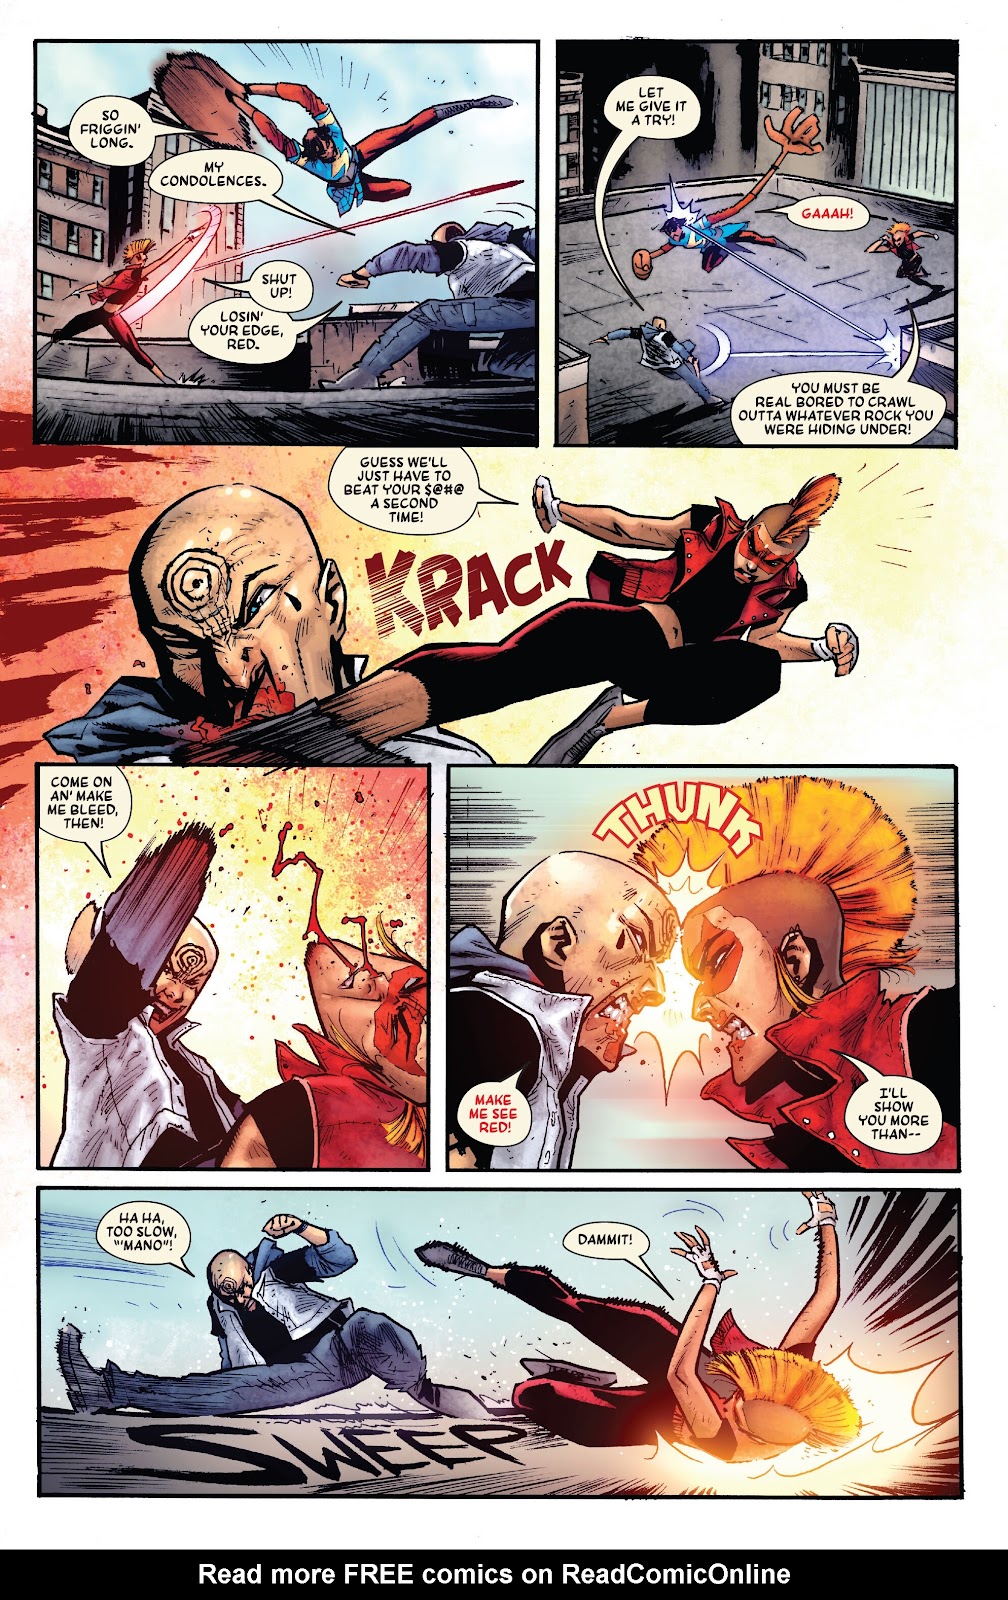 Spider-Punk: Arms Race issue 1 - Page 28